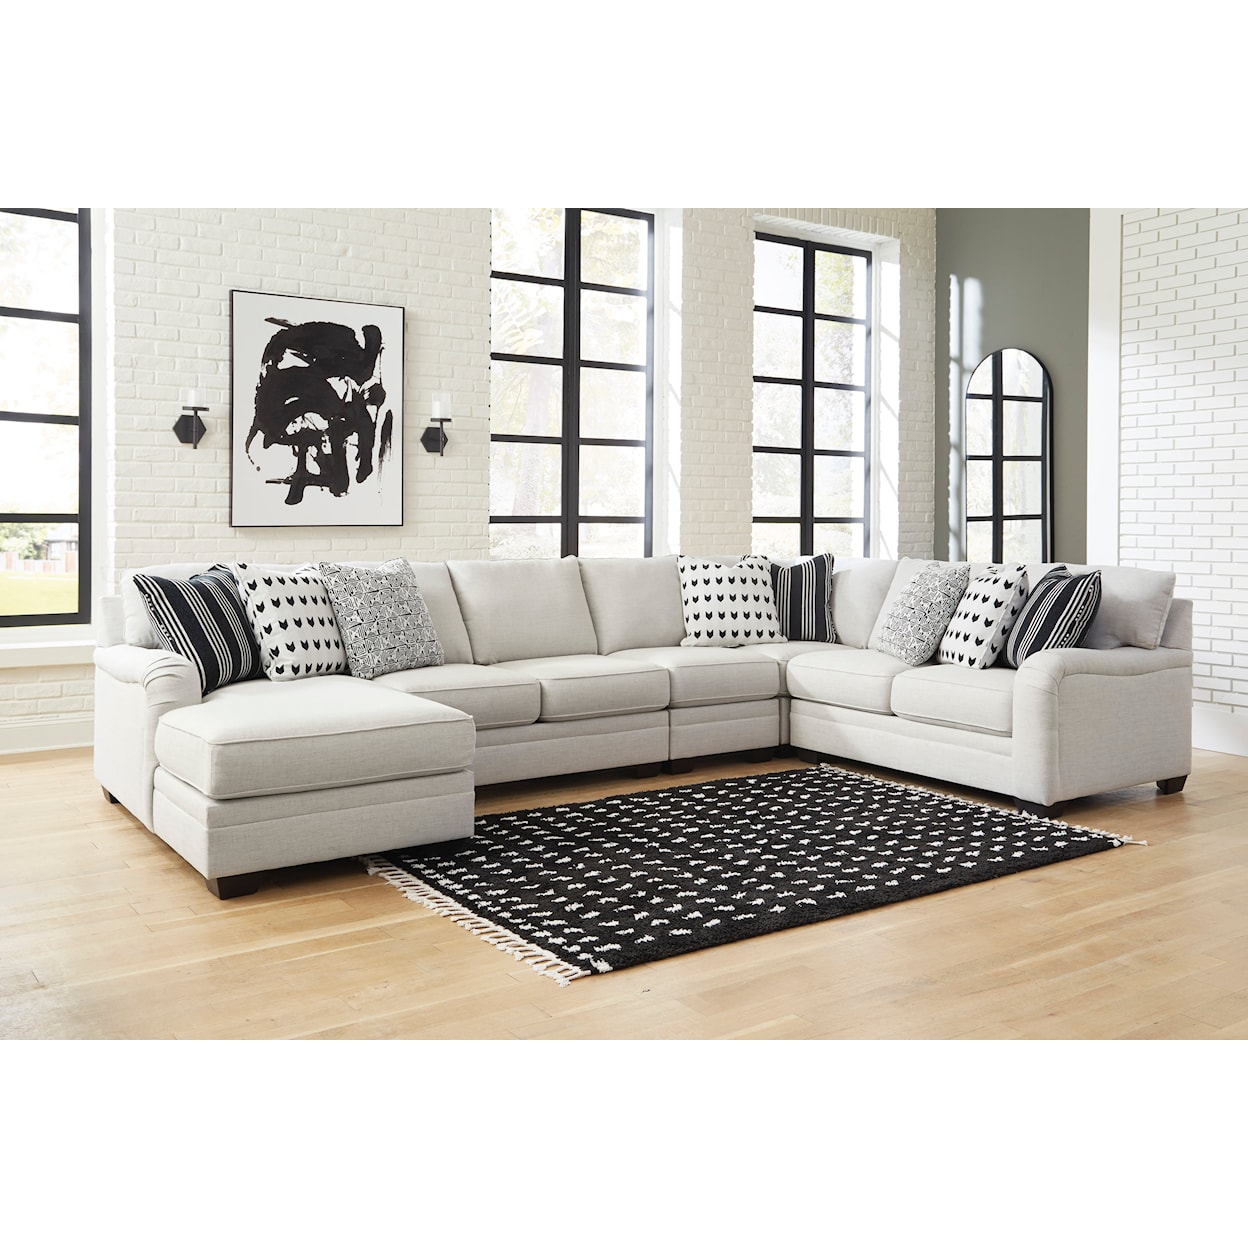 Signature Design by Ashley Furniture Huntsworth 5-Piece Sectional with Chaise